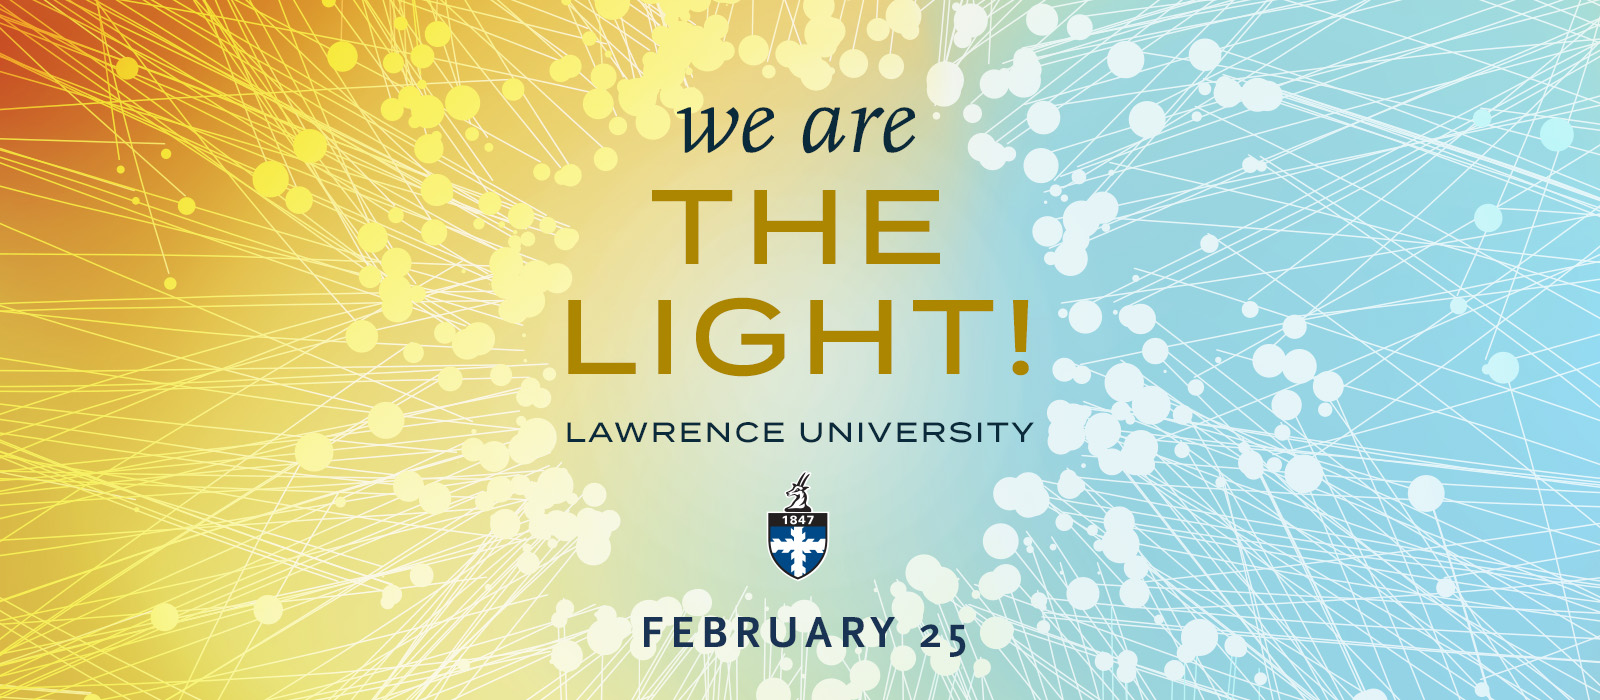 We are the light! Lawrence University - February 25